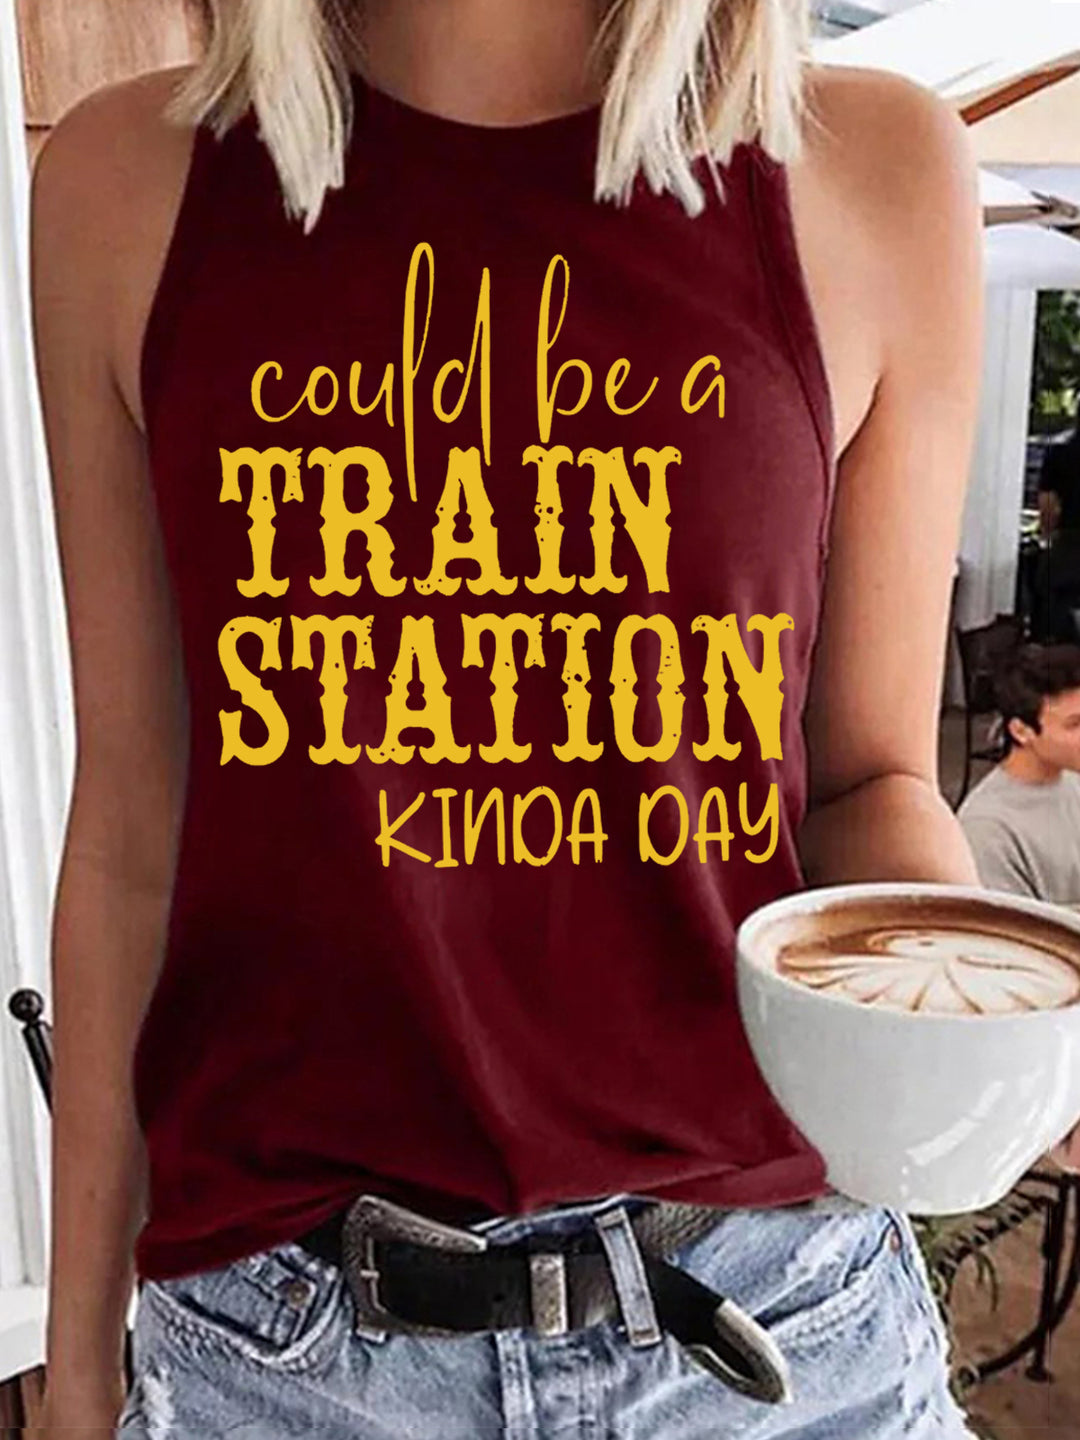 Women's Could Be A Train Station Kinda Day Tank Top